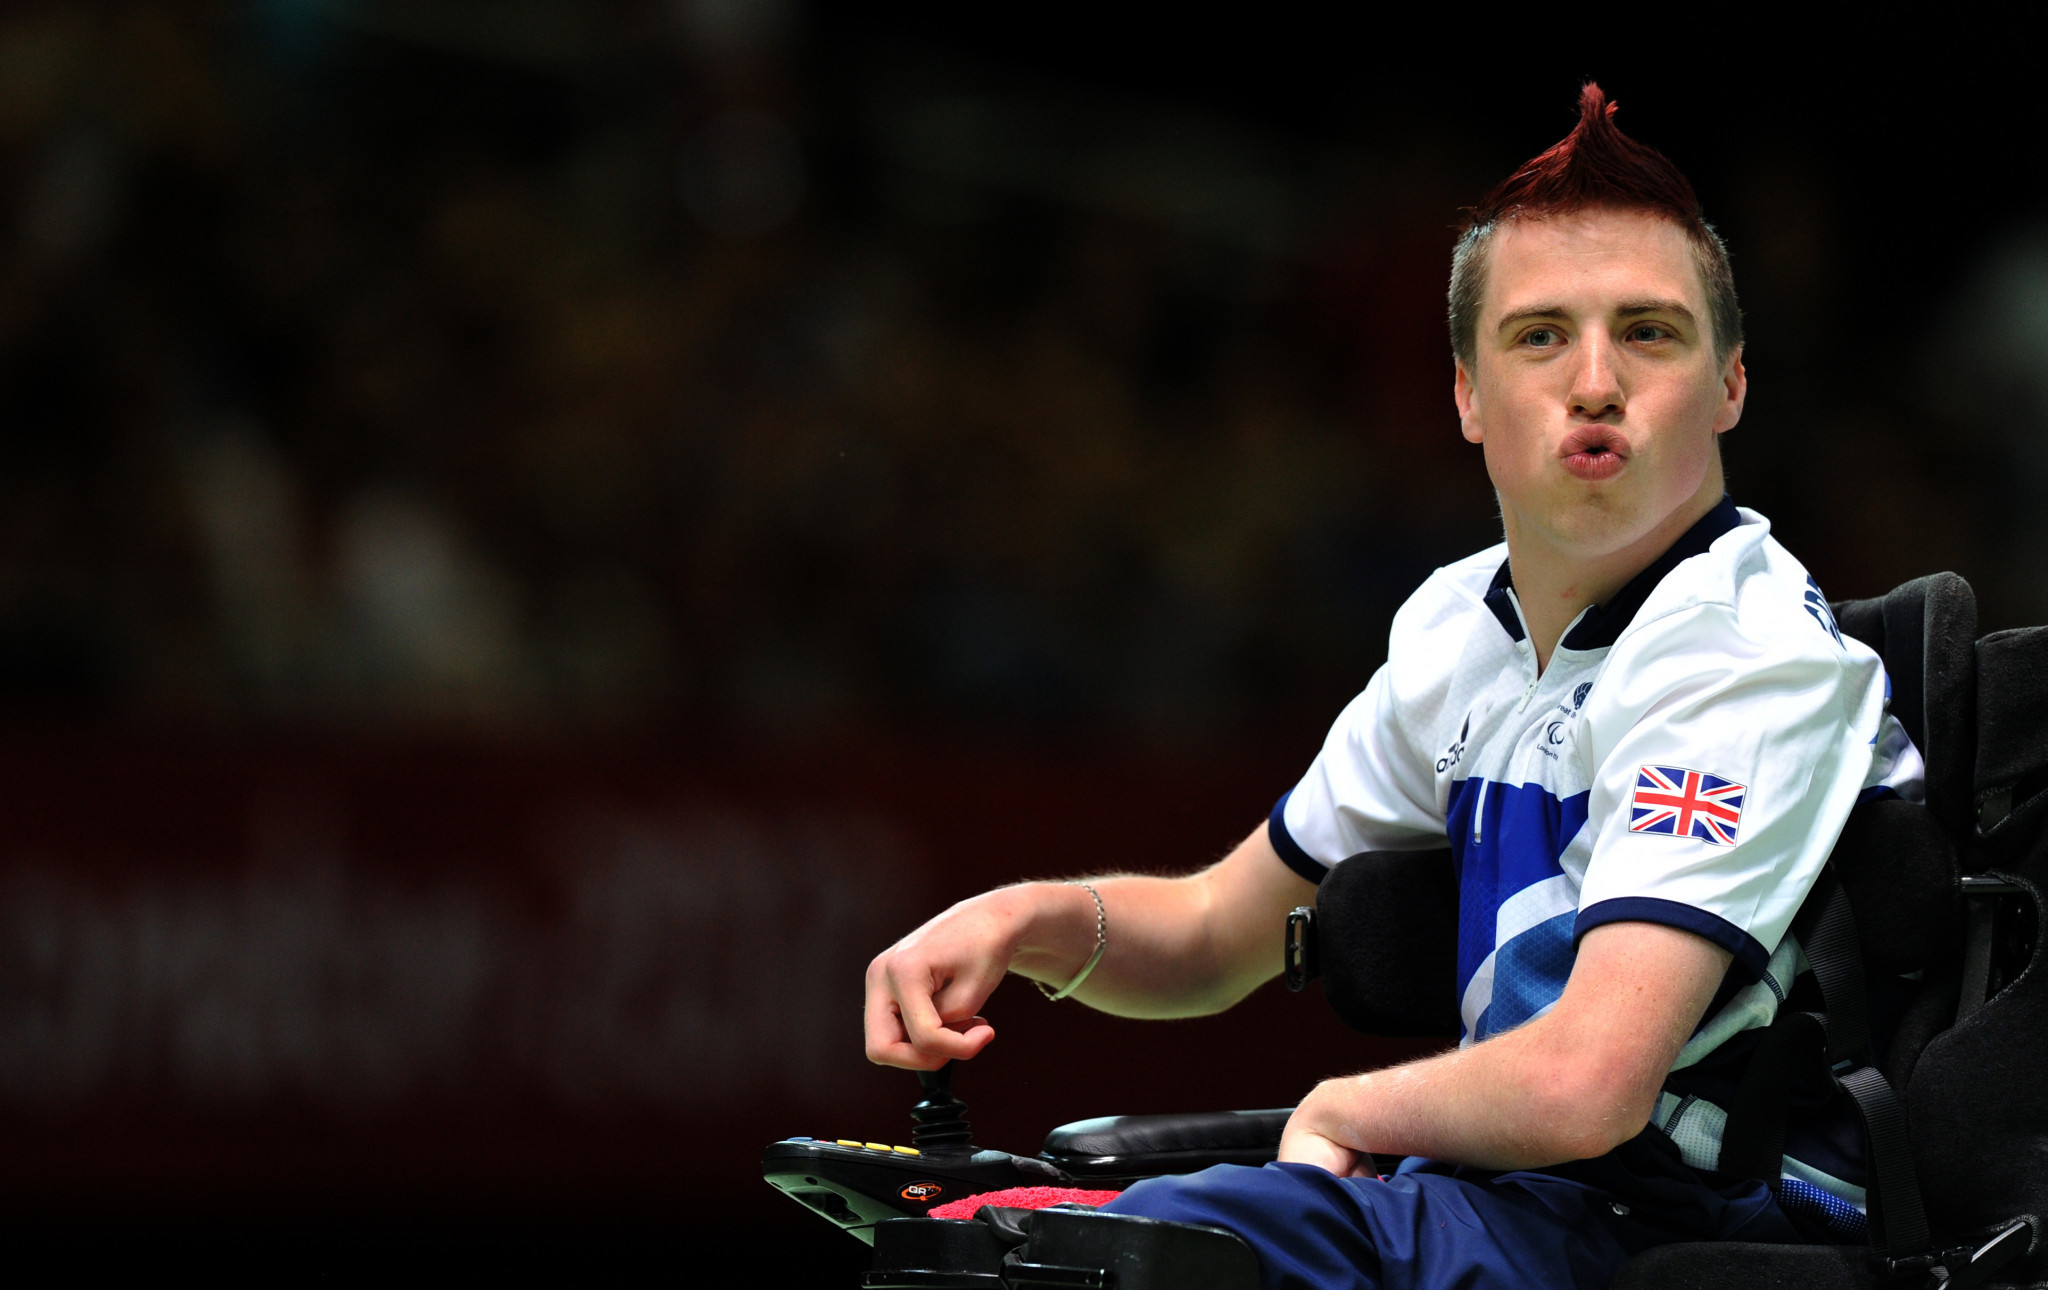 David Smith is looking to become Great Britain's most decorated boccia player in history at the Tokyo 2020 Paralympics ©Getty Images